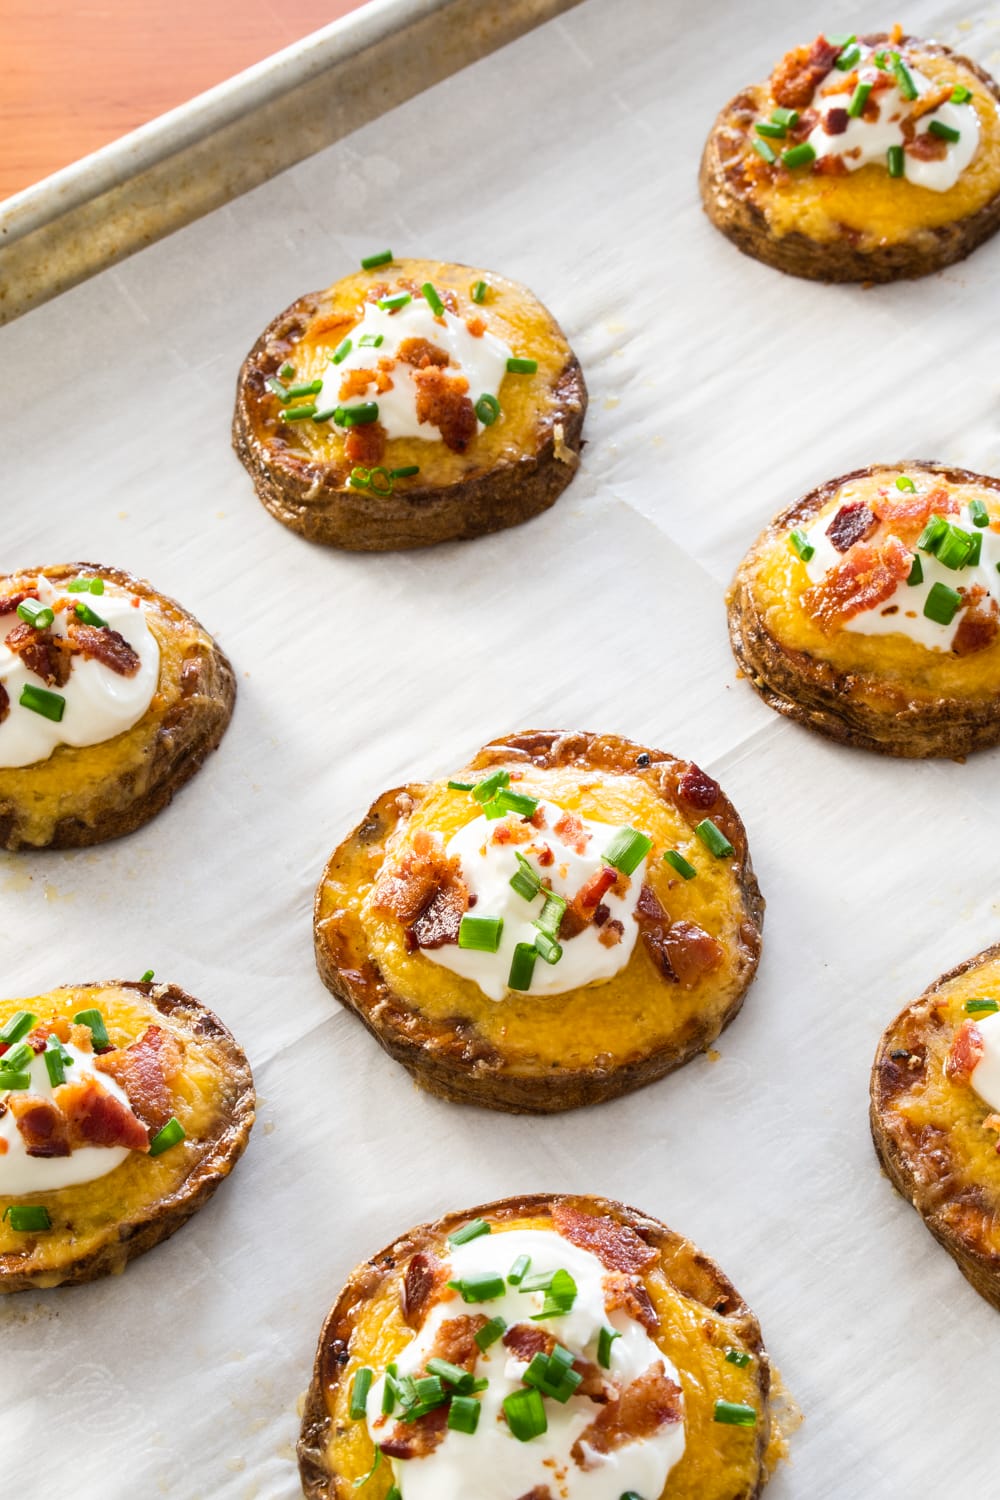 https://fortheloveofcooking-net.exactdn.com/wp-content/uploads/2021/03/Loaded-Baked-Potato-Bites-9301-2-2.jpg?strip=all&lossy=1&quality=90&ssl=1